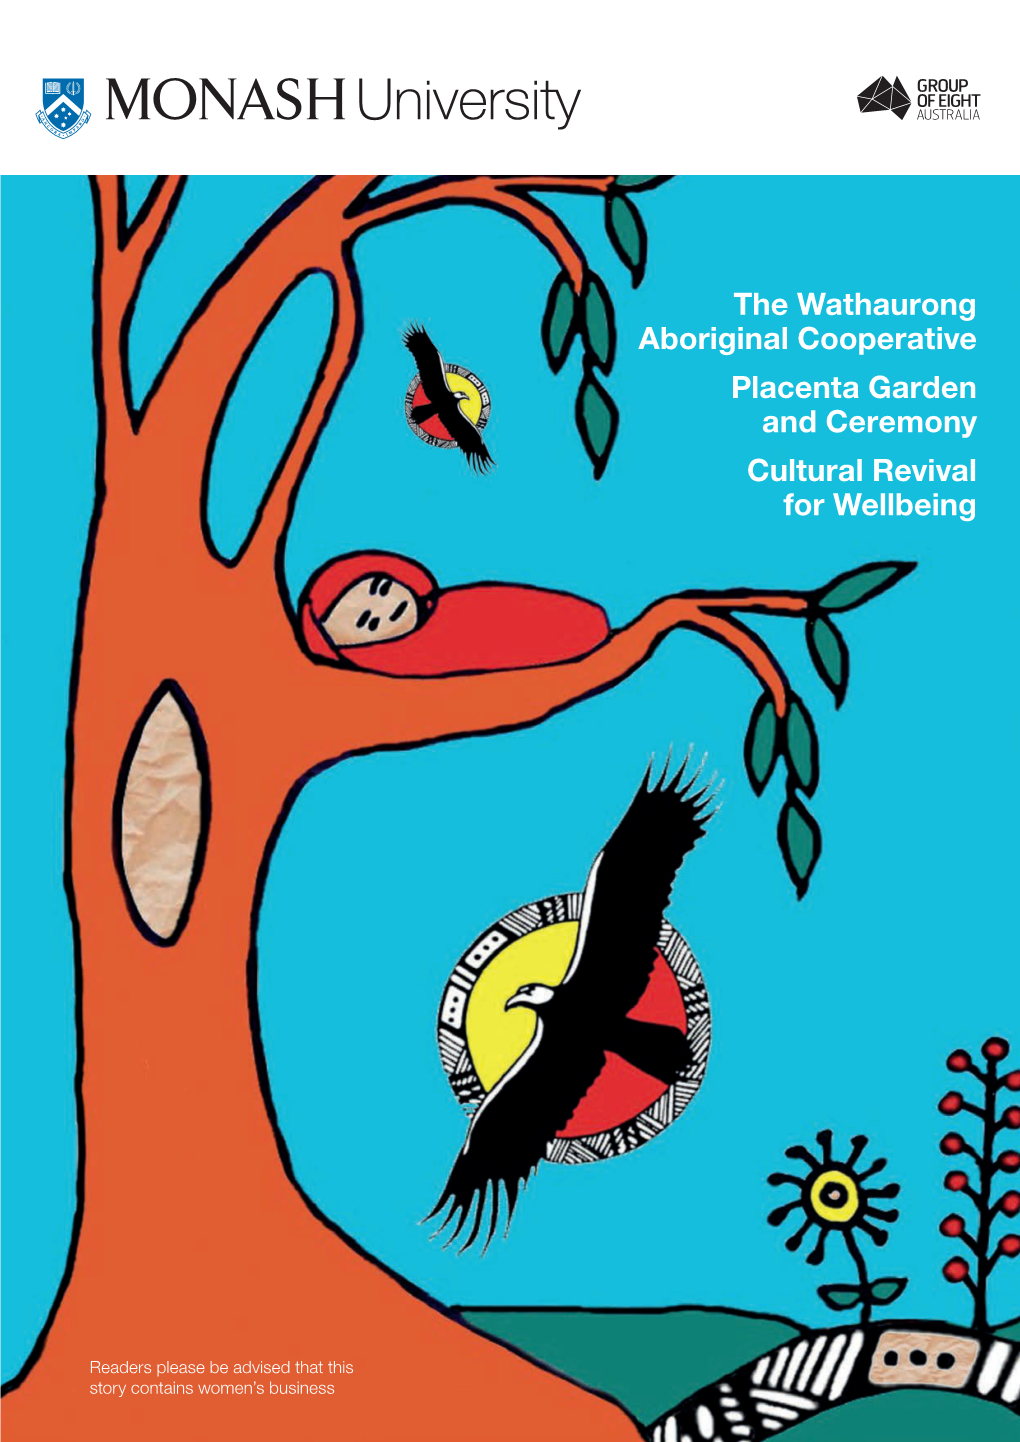 The Wathaurong Aboriginal Cooperative Placenta Garden and Ceremony Cultural Revival for Wellbeing